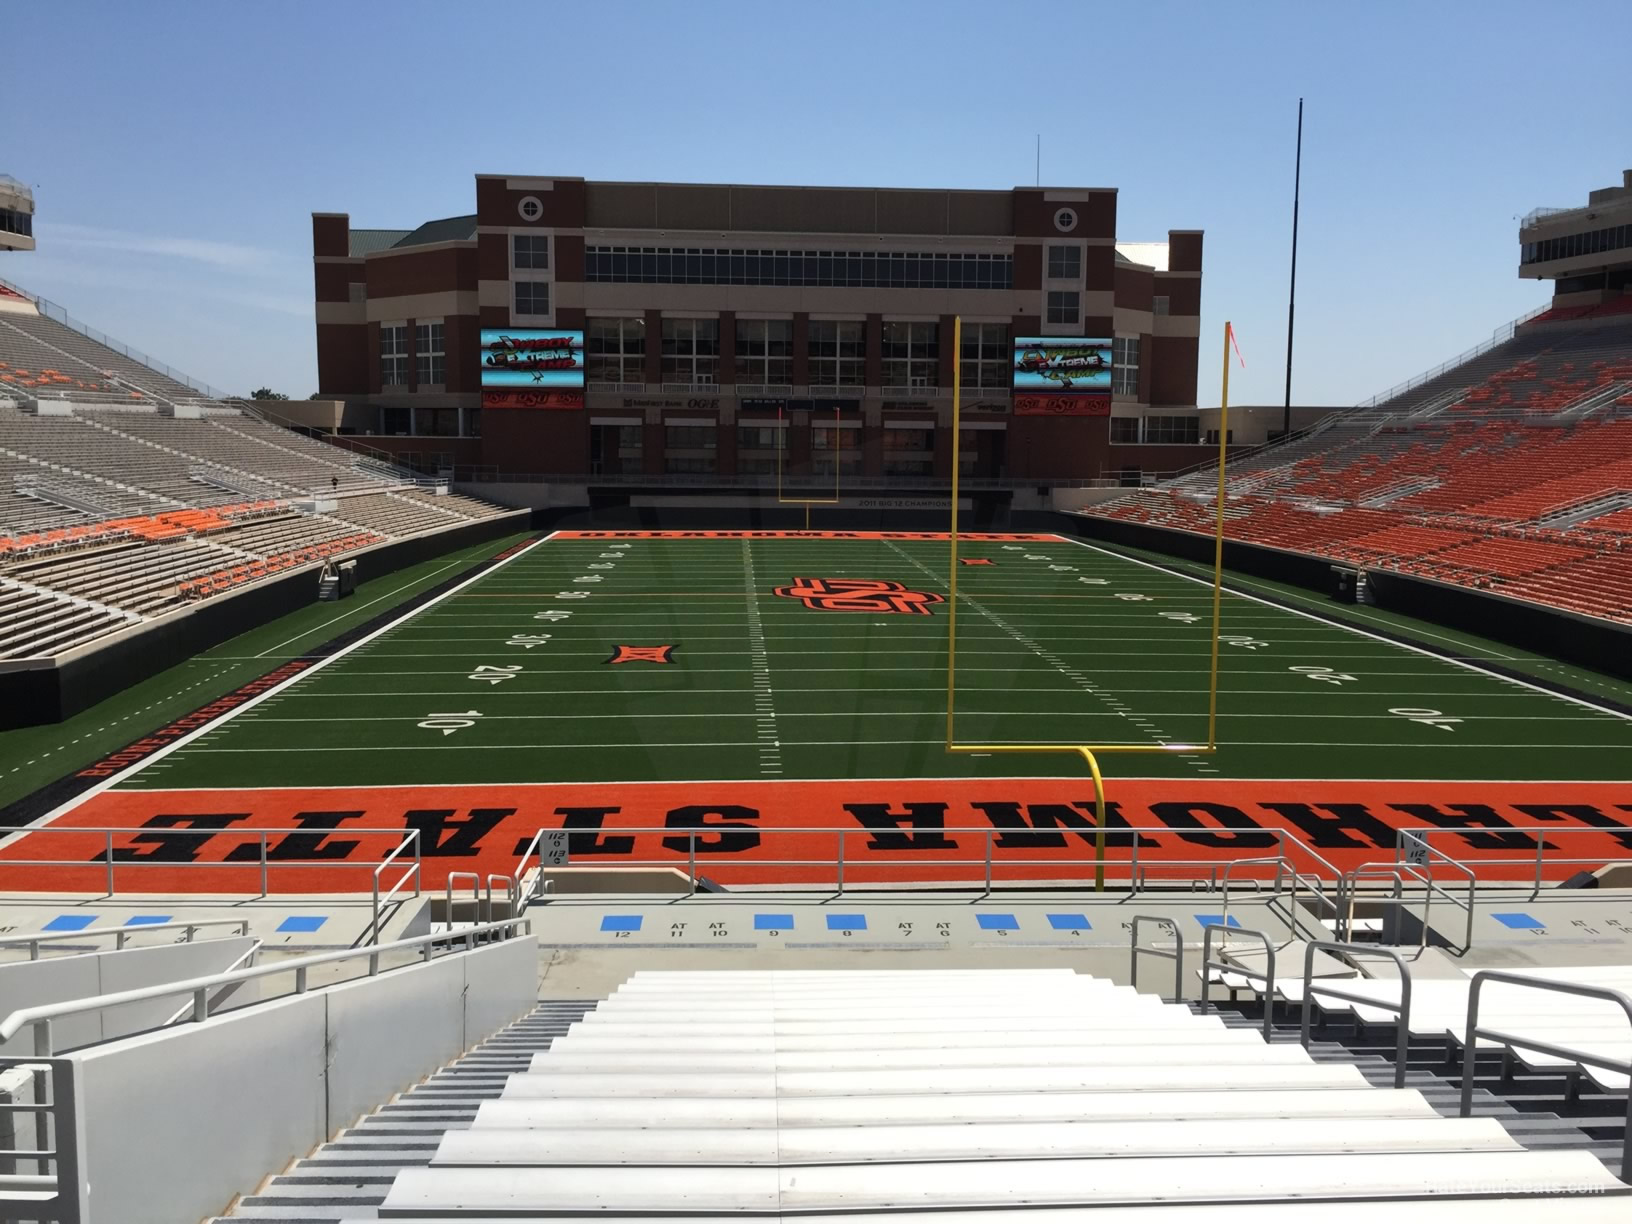 section 217, row 20 seat view  - boone pickens stadium